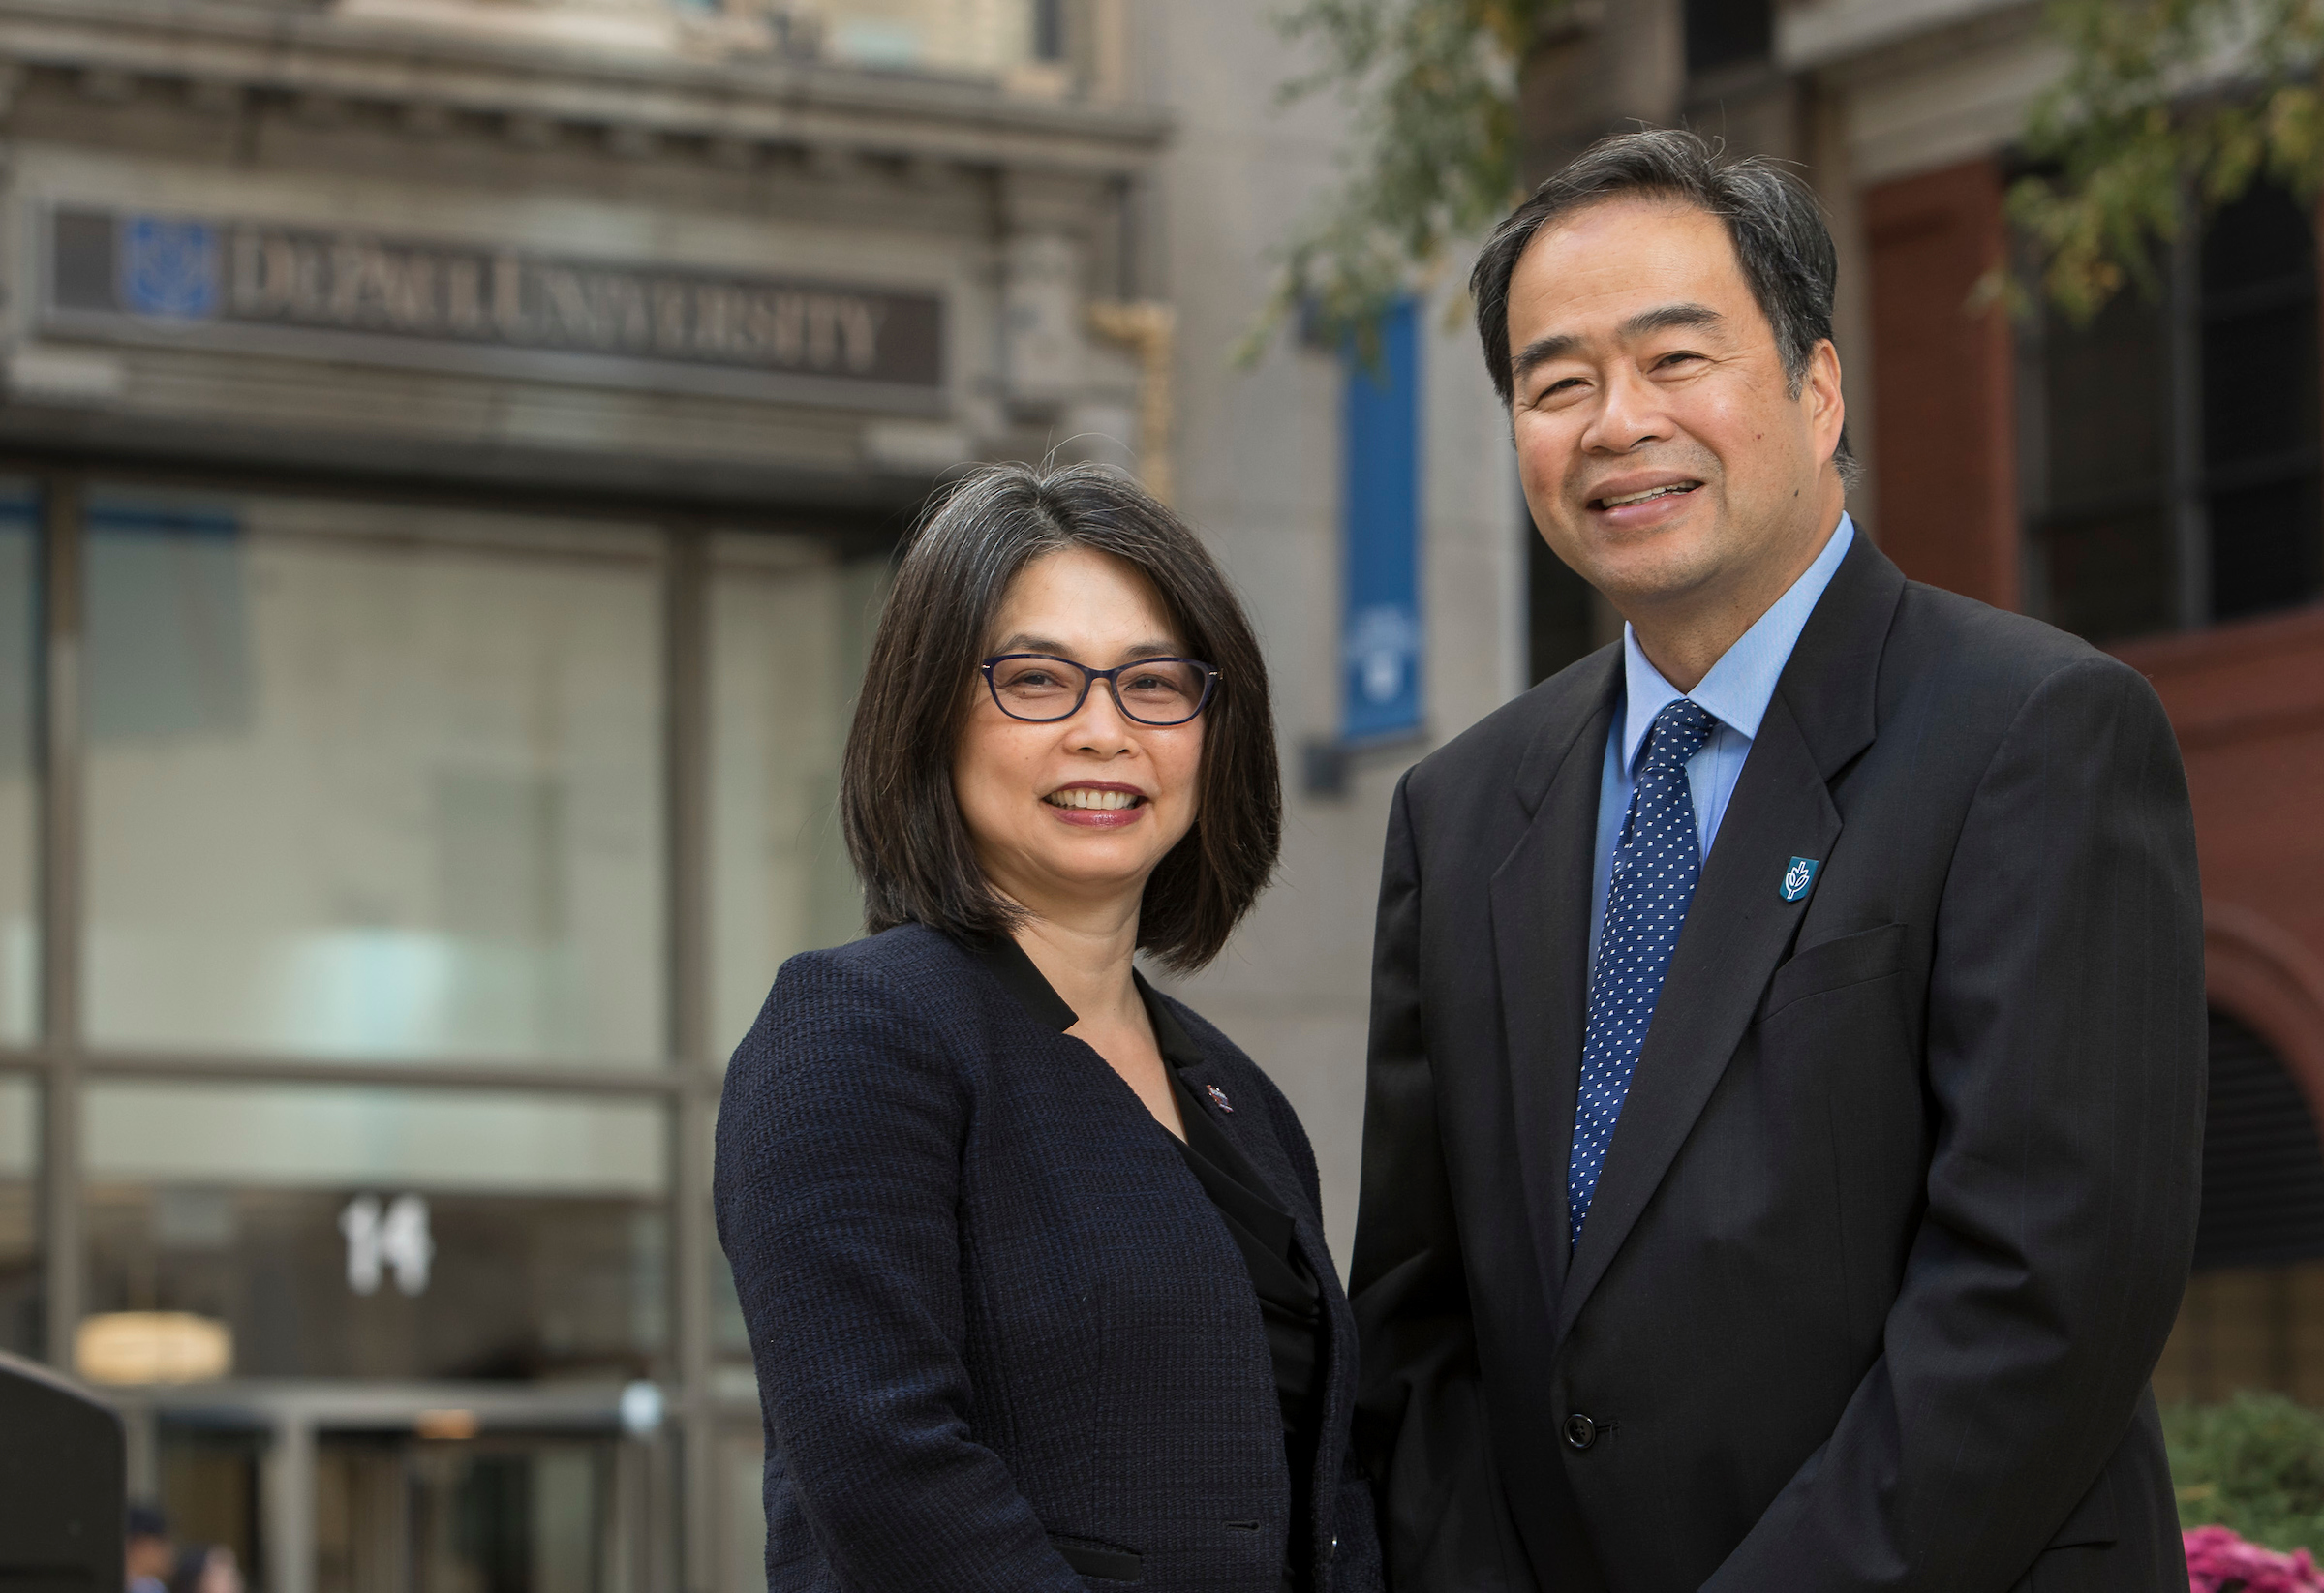 Portrait of A. Gabriel Esteban, Ph.D., president of DePaul University in Chicago, and his wife, Josephine.